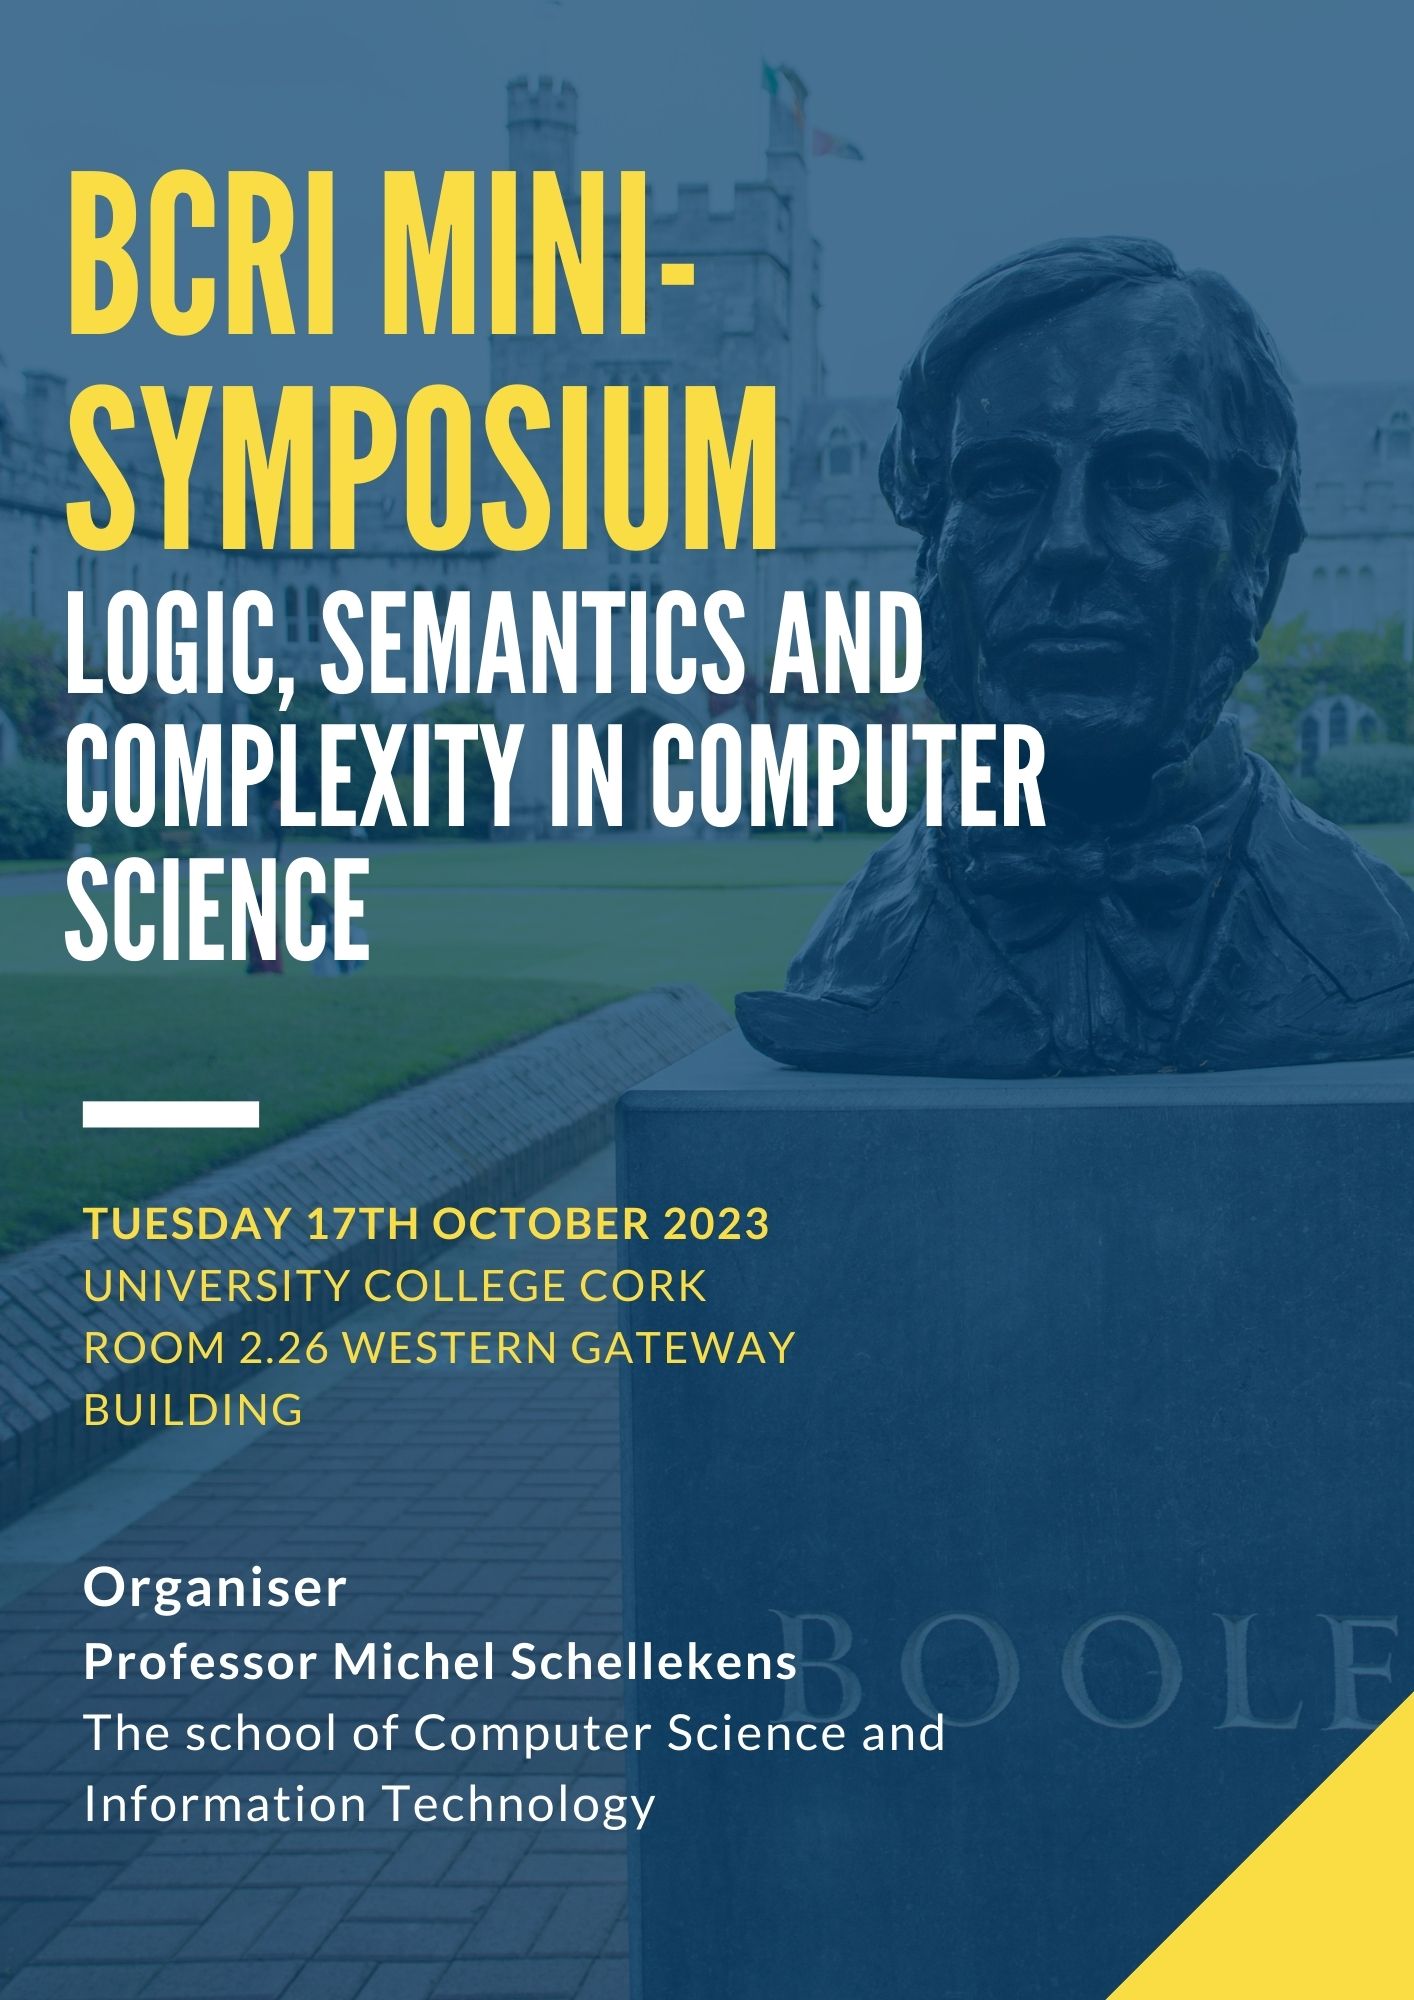 Stephen Brookes and Peter O’Hearn will present at a Mini Symposium  “LOGIC, SEMANTICS AND COMPLEXITY IN COMPUTER SCIENCE”  hosted by the BCRI